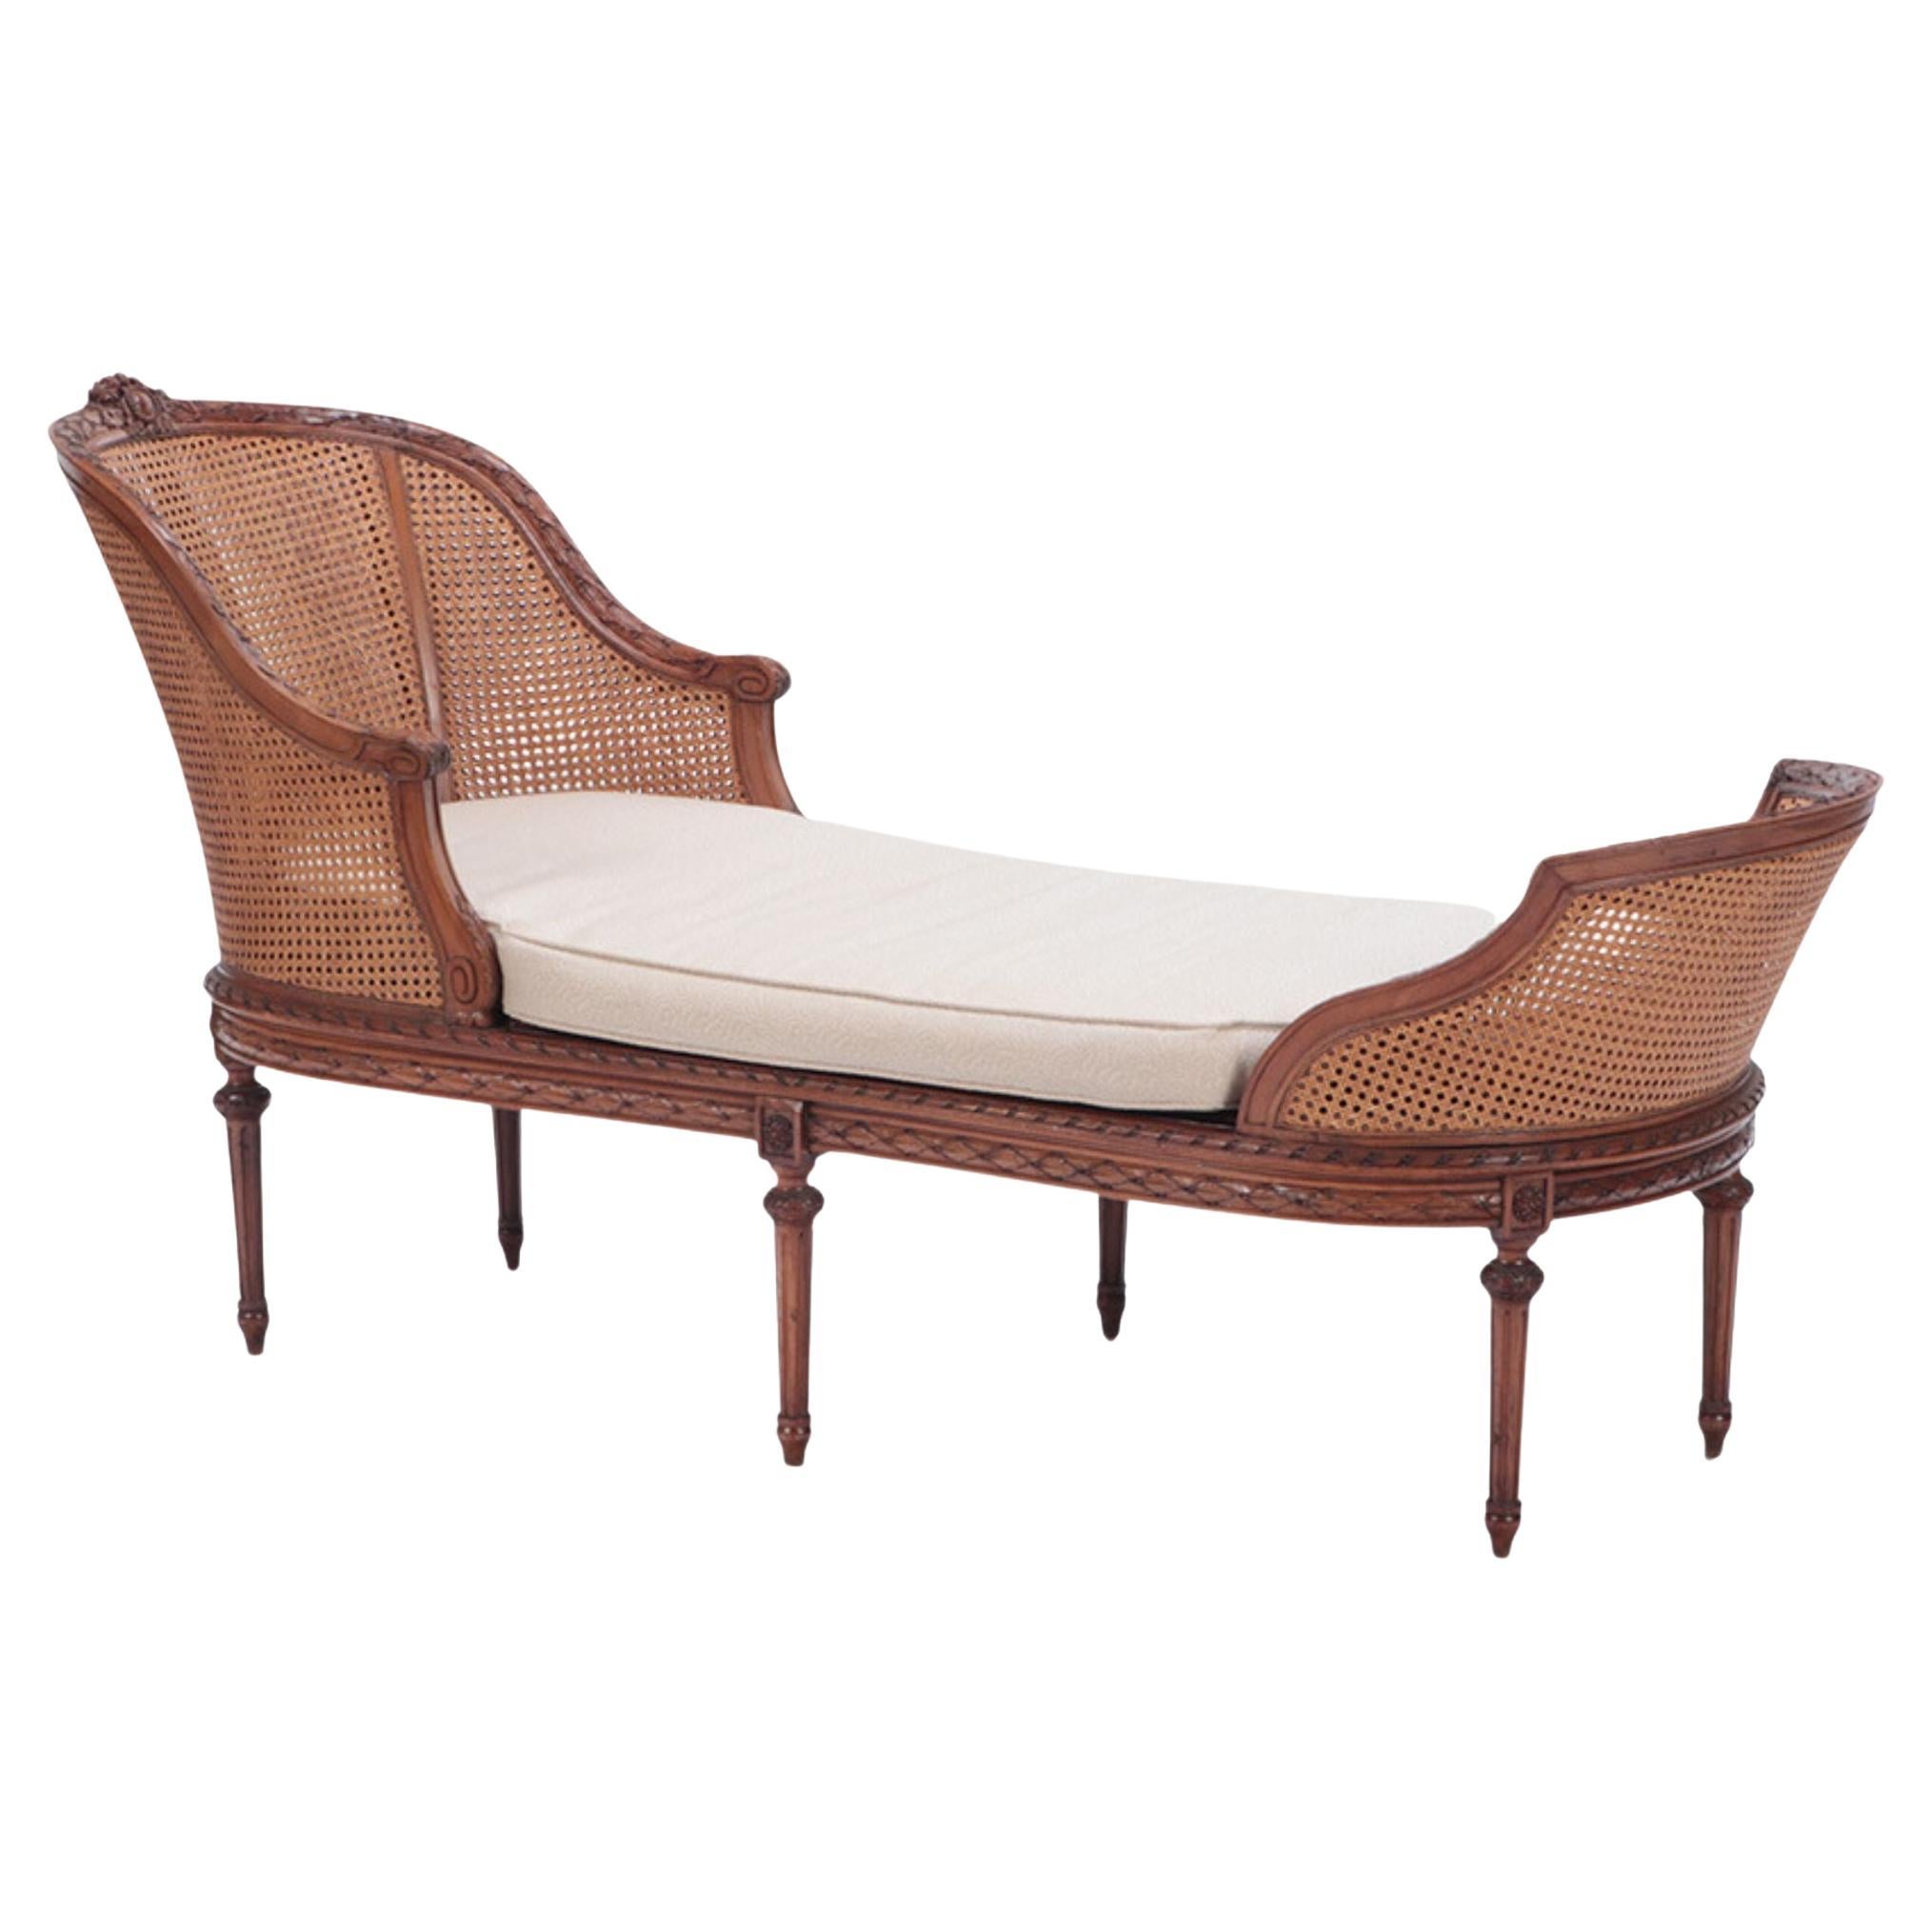 French Carved Walnut Chaise Lounge in the Louis XVI Style, circa 1900 For Sale